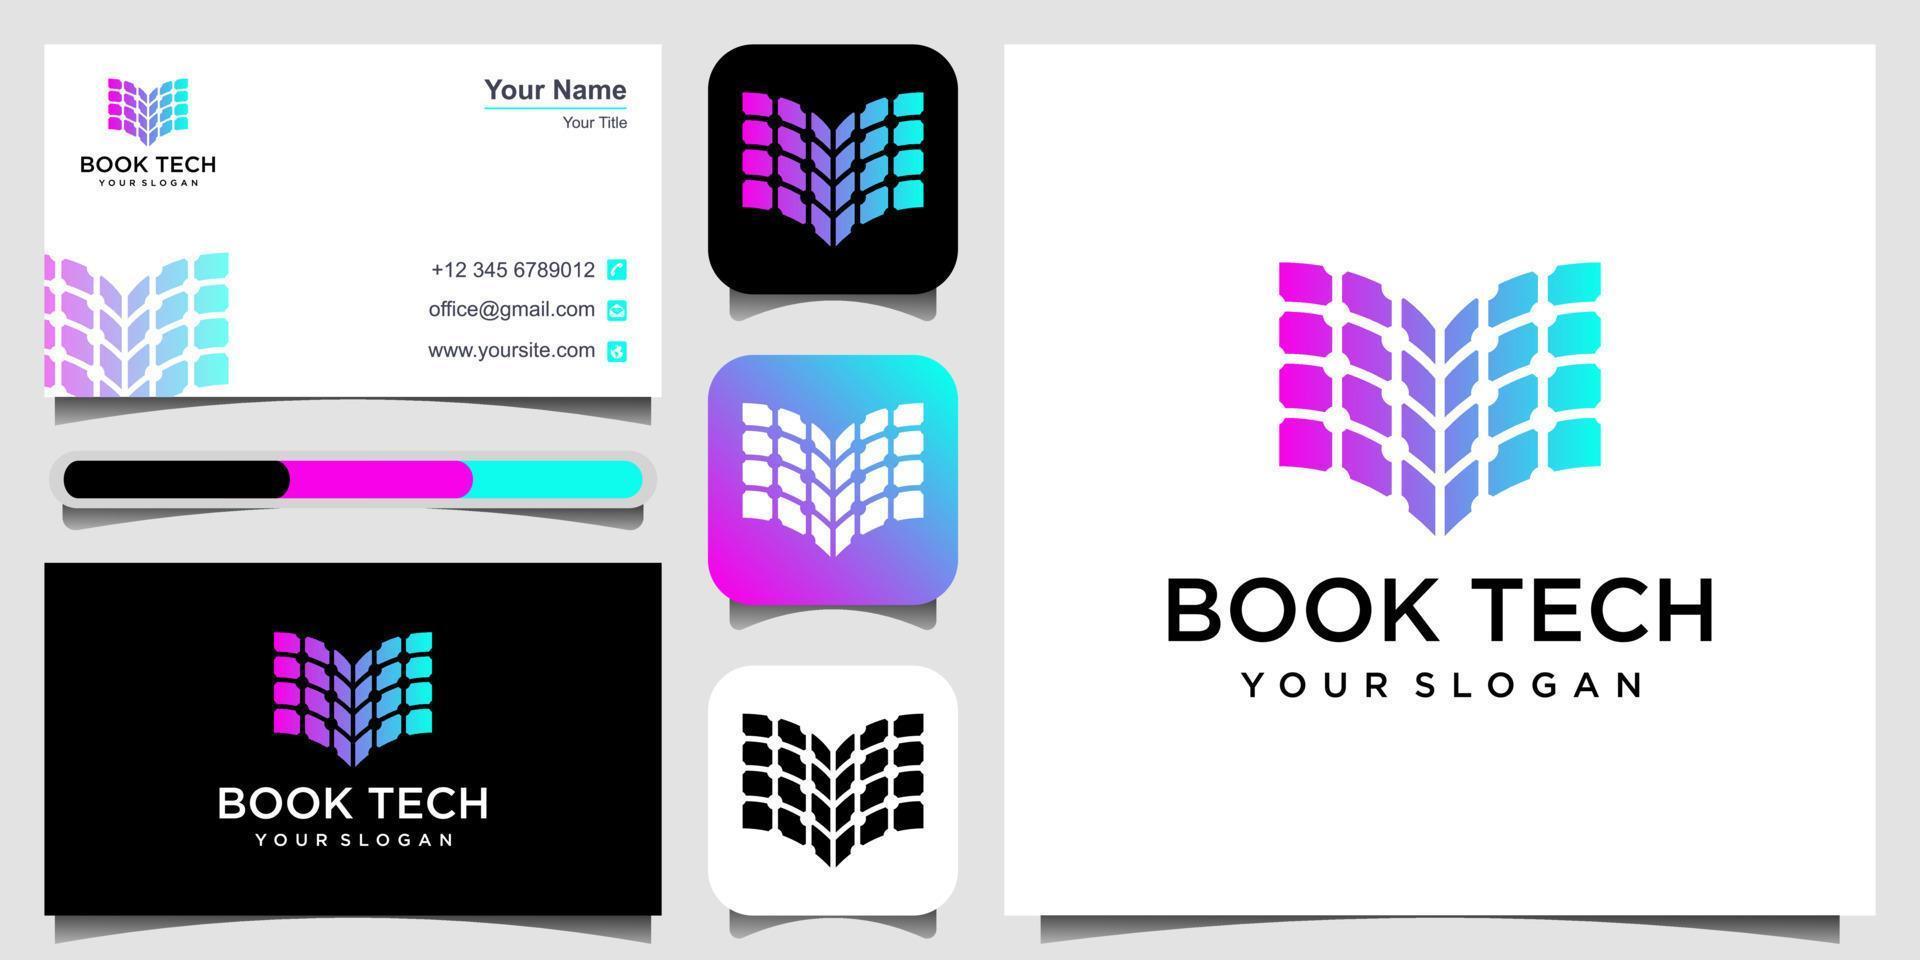 Digital Book logo, Electronic Book logo template, Online Learning logo designs vector. icon and business card Premium Vector. vector